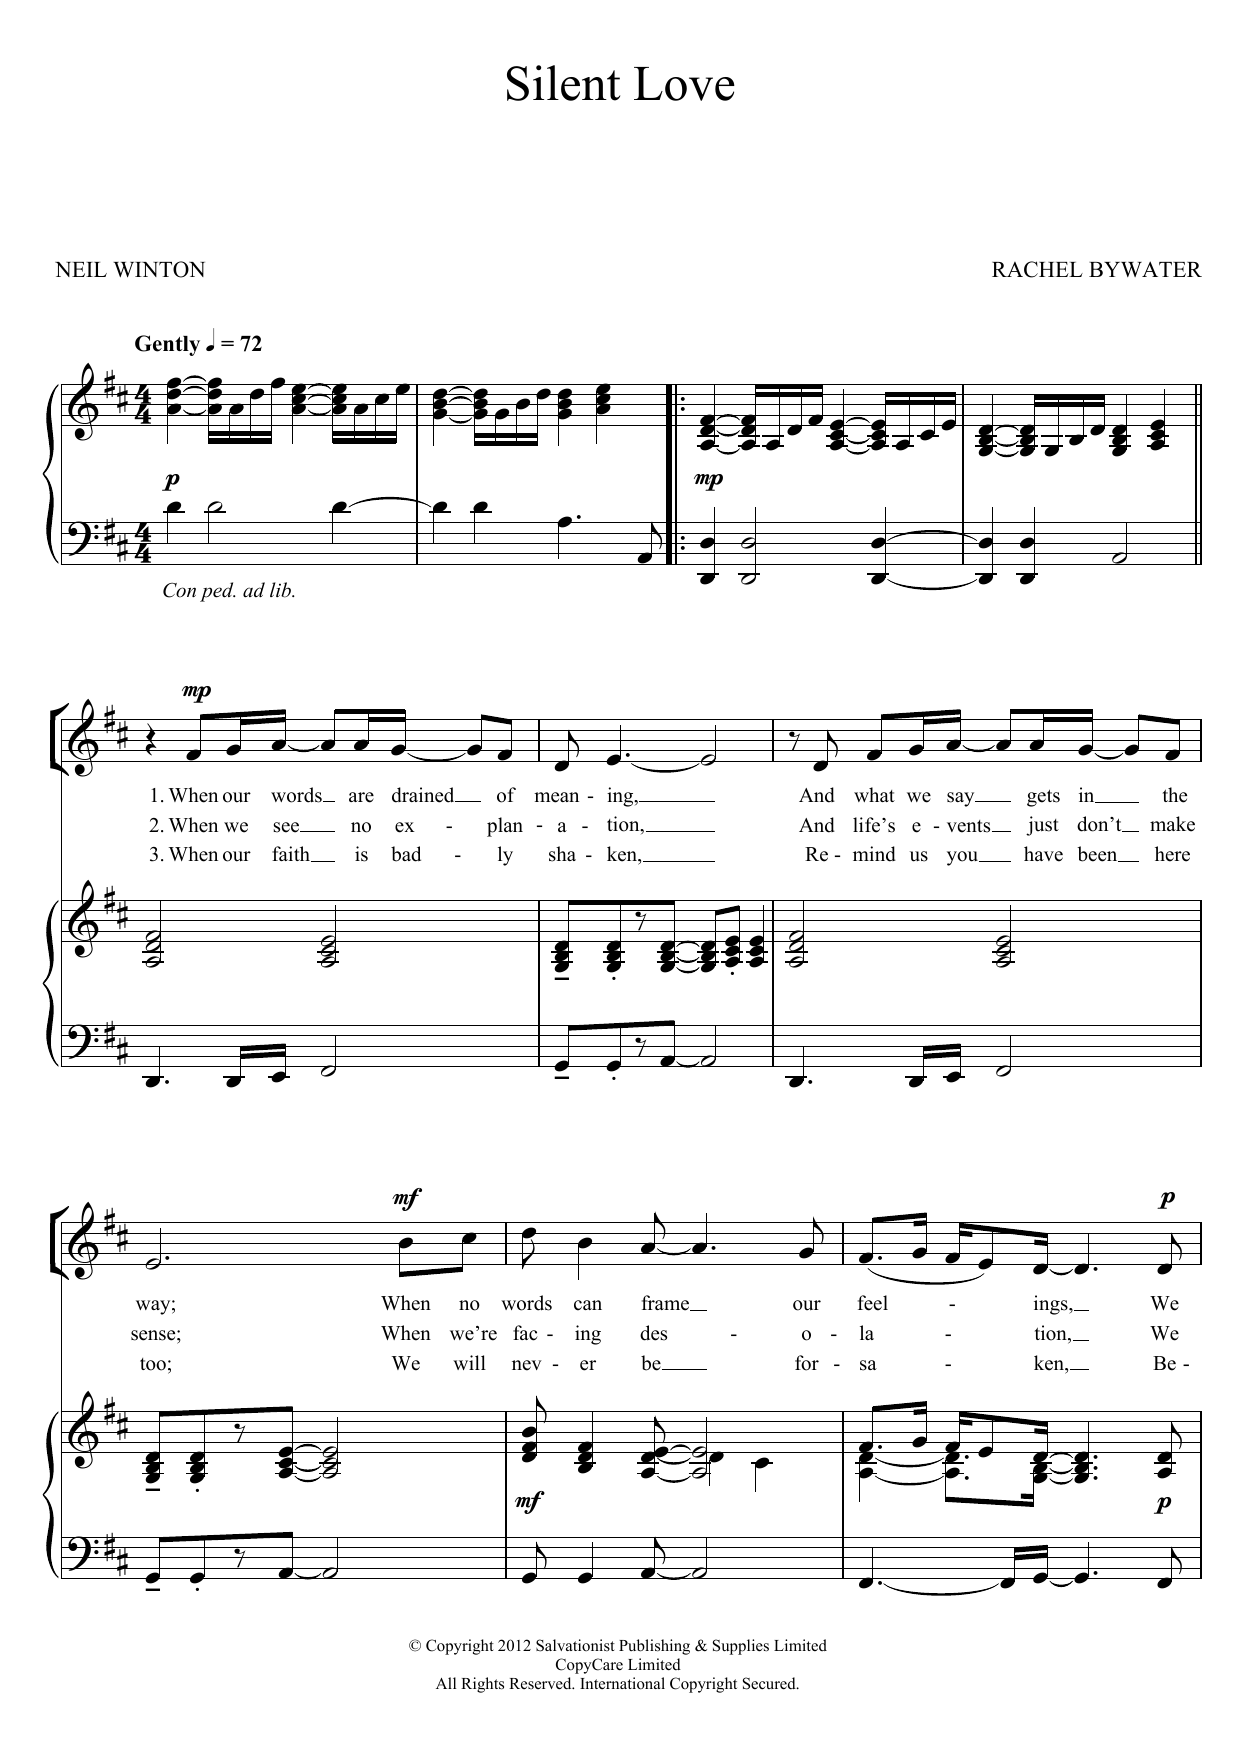 Download The Salvation Army Silent Love Sheet Music